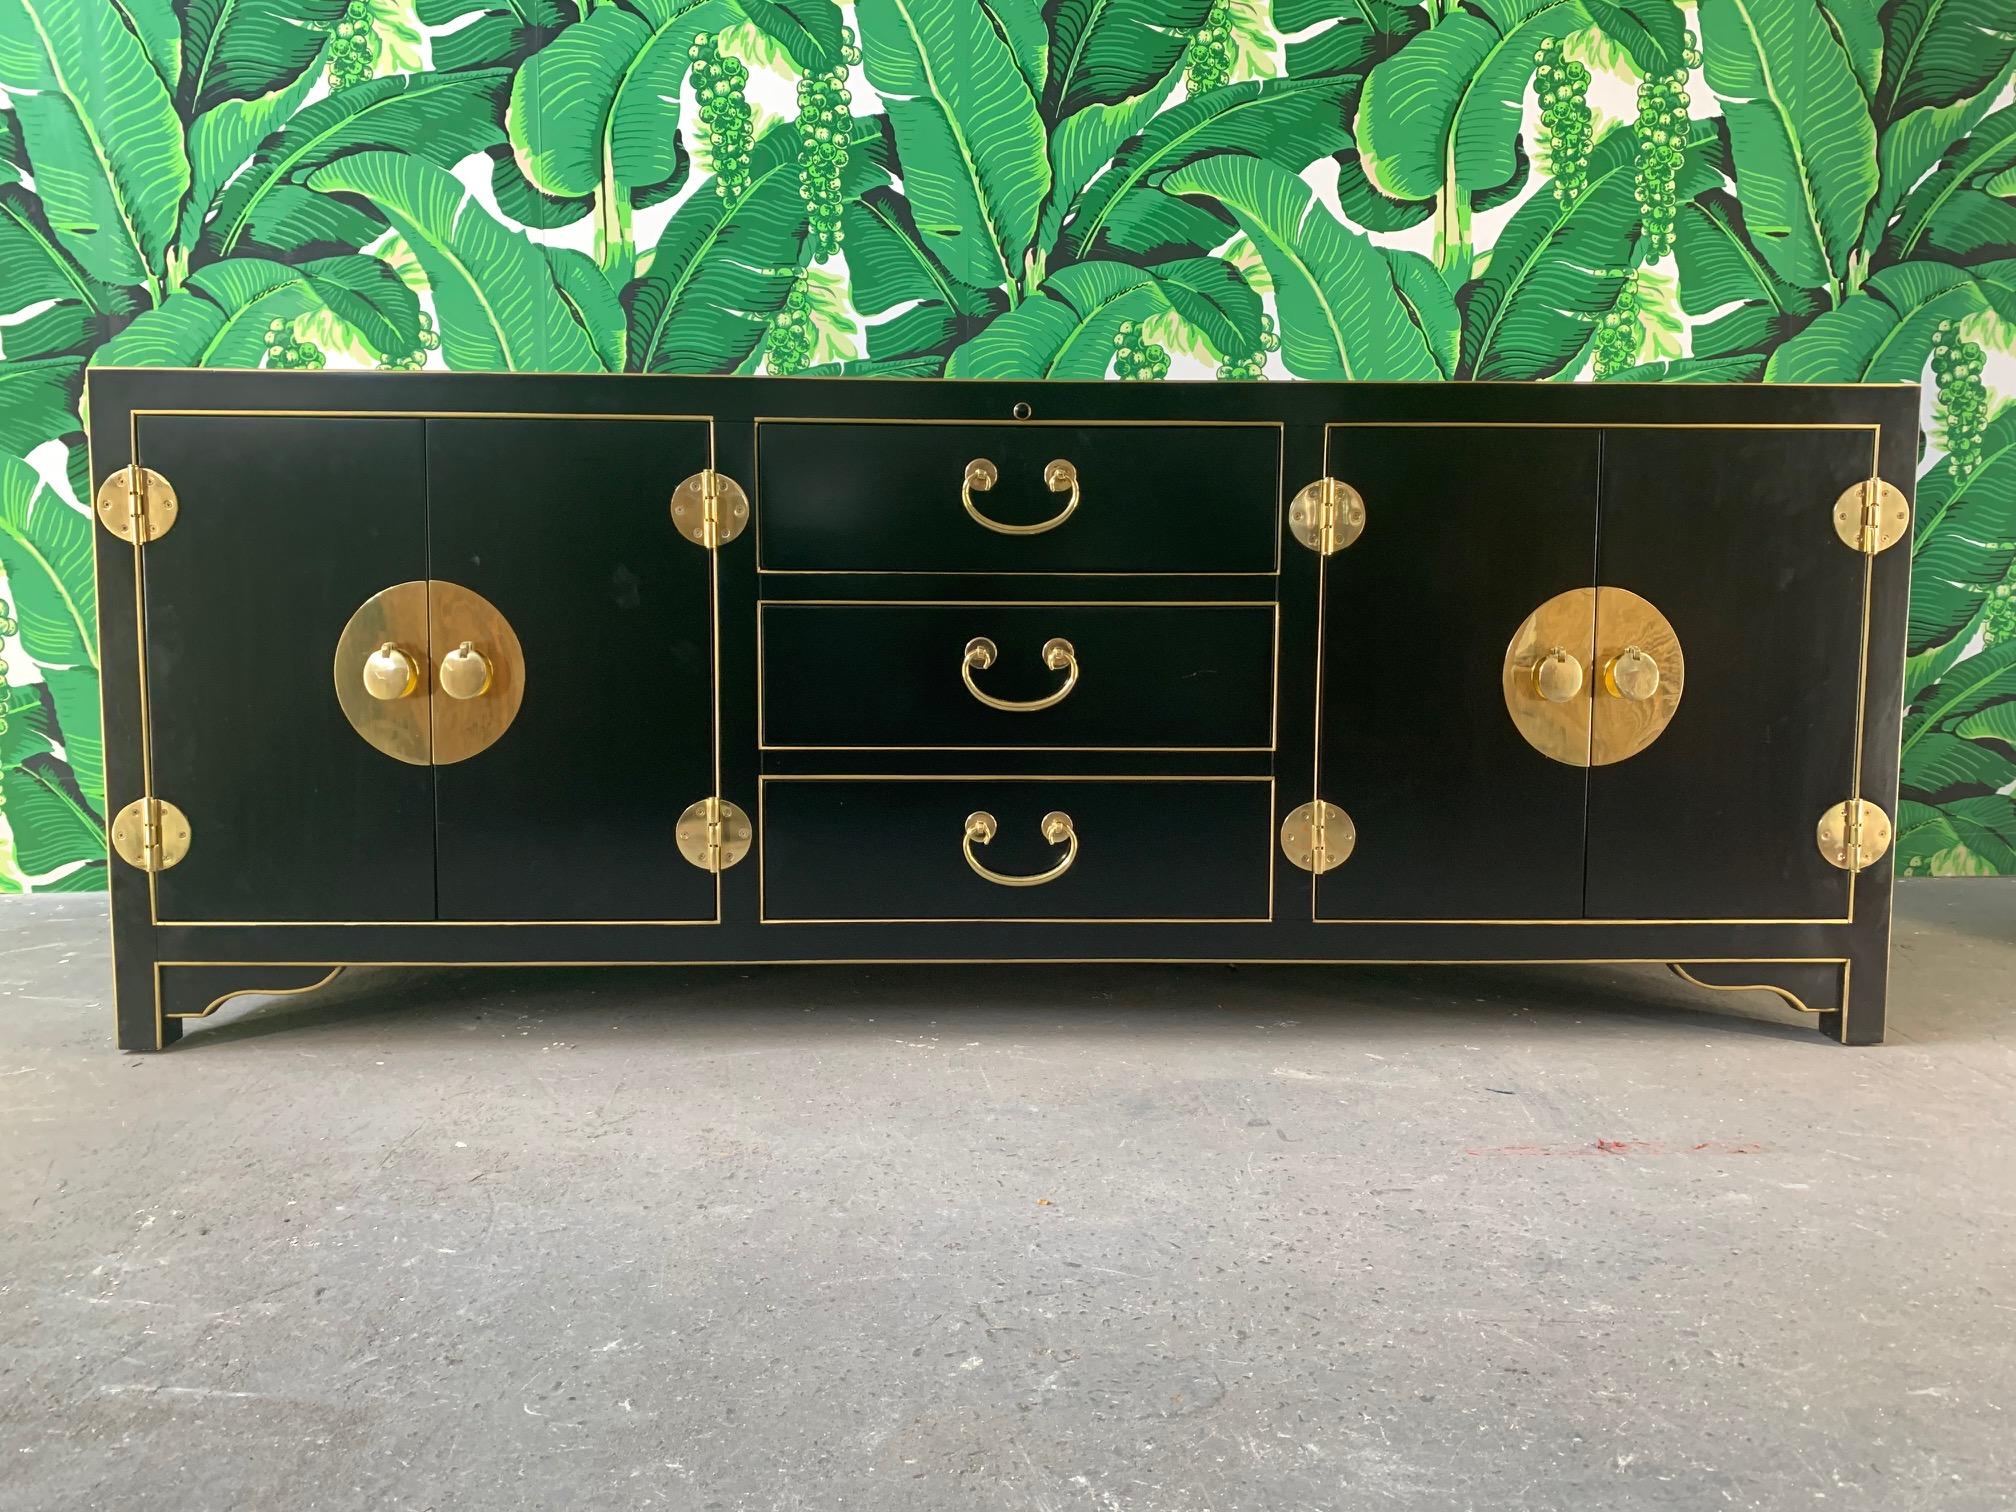 Credenza by Sligh Furniture features brilliant black finish with gold detailing and heavy brass hardware. Three drawers and two double door sections revealing shelving for storage. Includes infrared SmartEye for media remote control. Very good